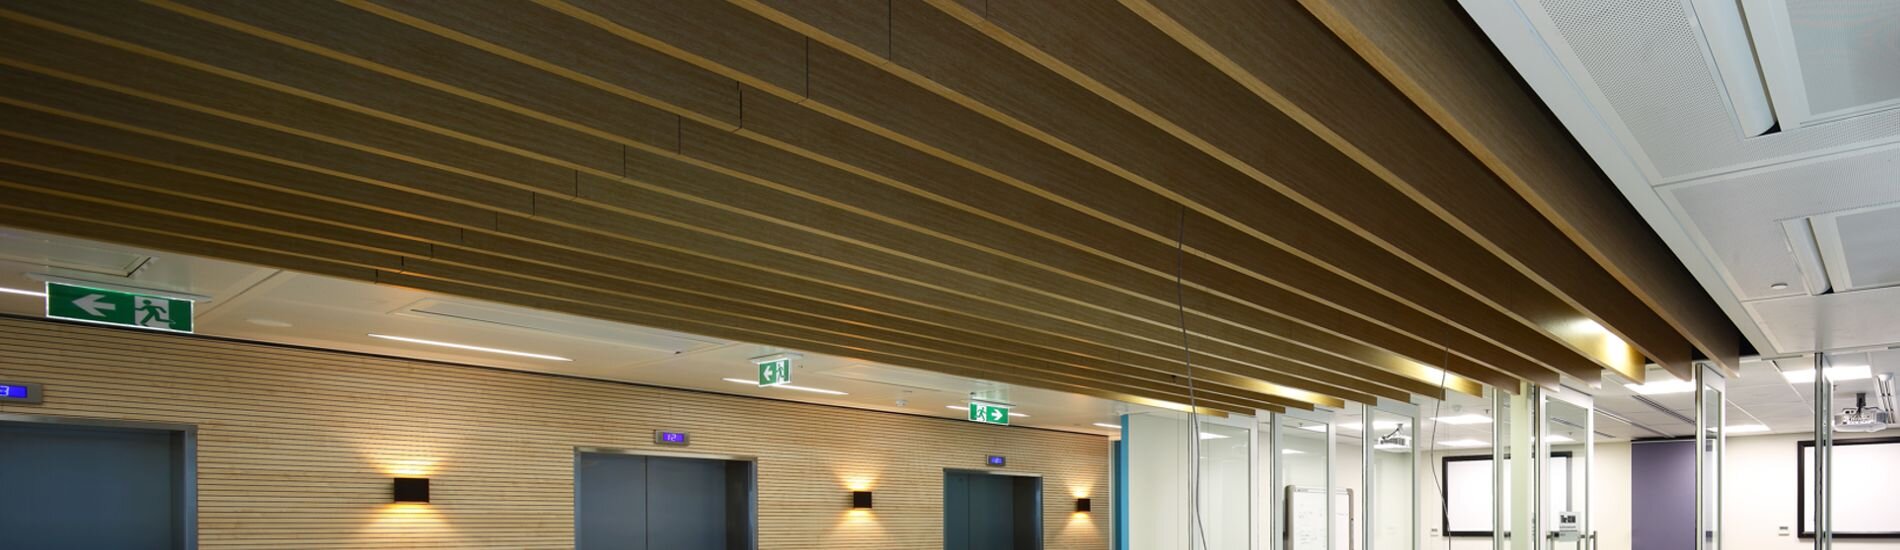 Lightweight timber MAXI BEAM solves logistics problems for high rise office fitout